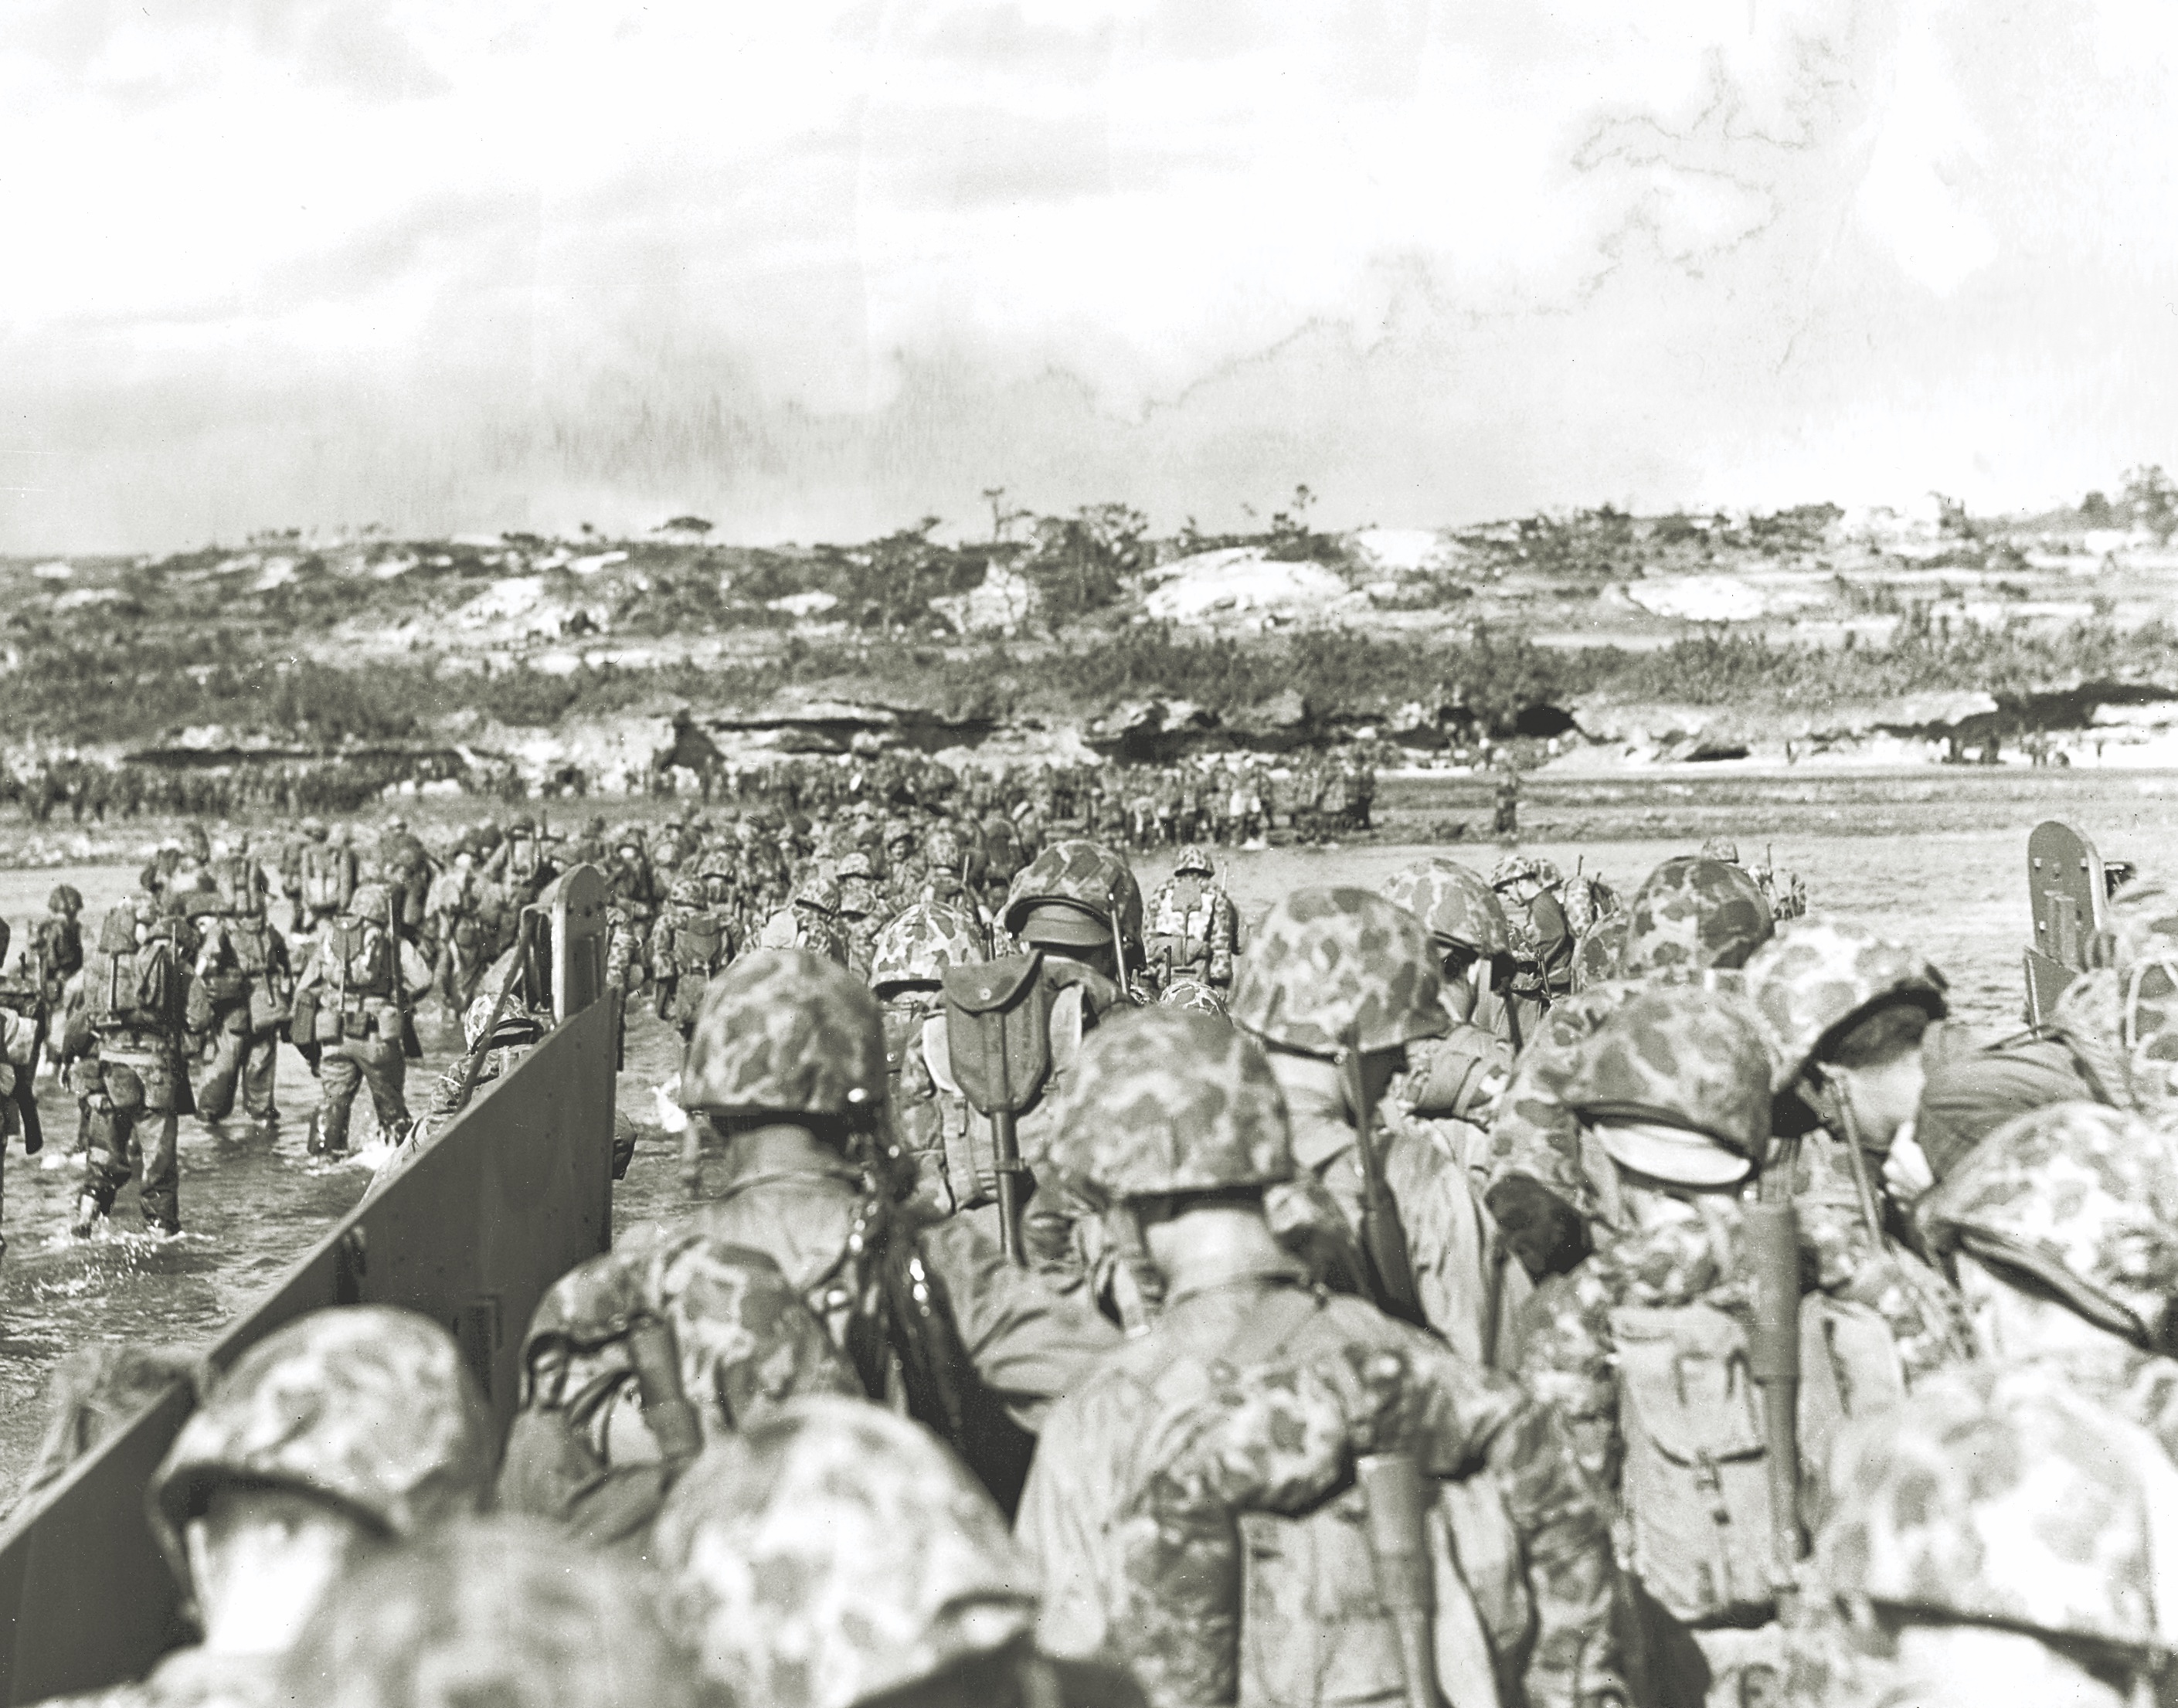 U.S. troops wade from landing craft onto the beaches of Okinawa on April 1, 1945. Pyle, who sailed to the island on the command ship USS Panamint, confided to friends, “I’m not coming back from this one.” (U.S. Marine Corps History Division)